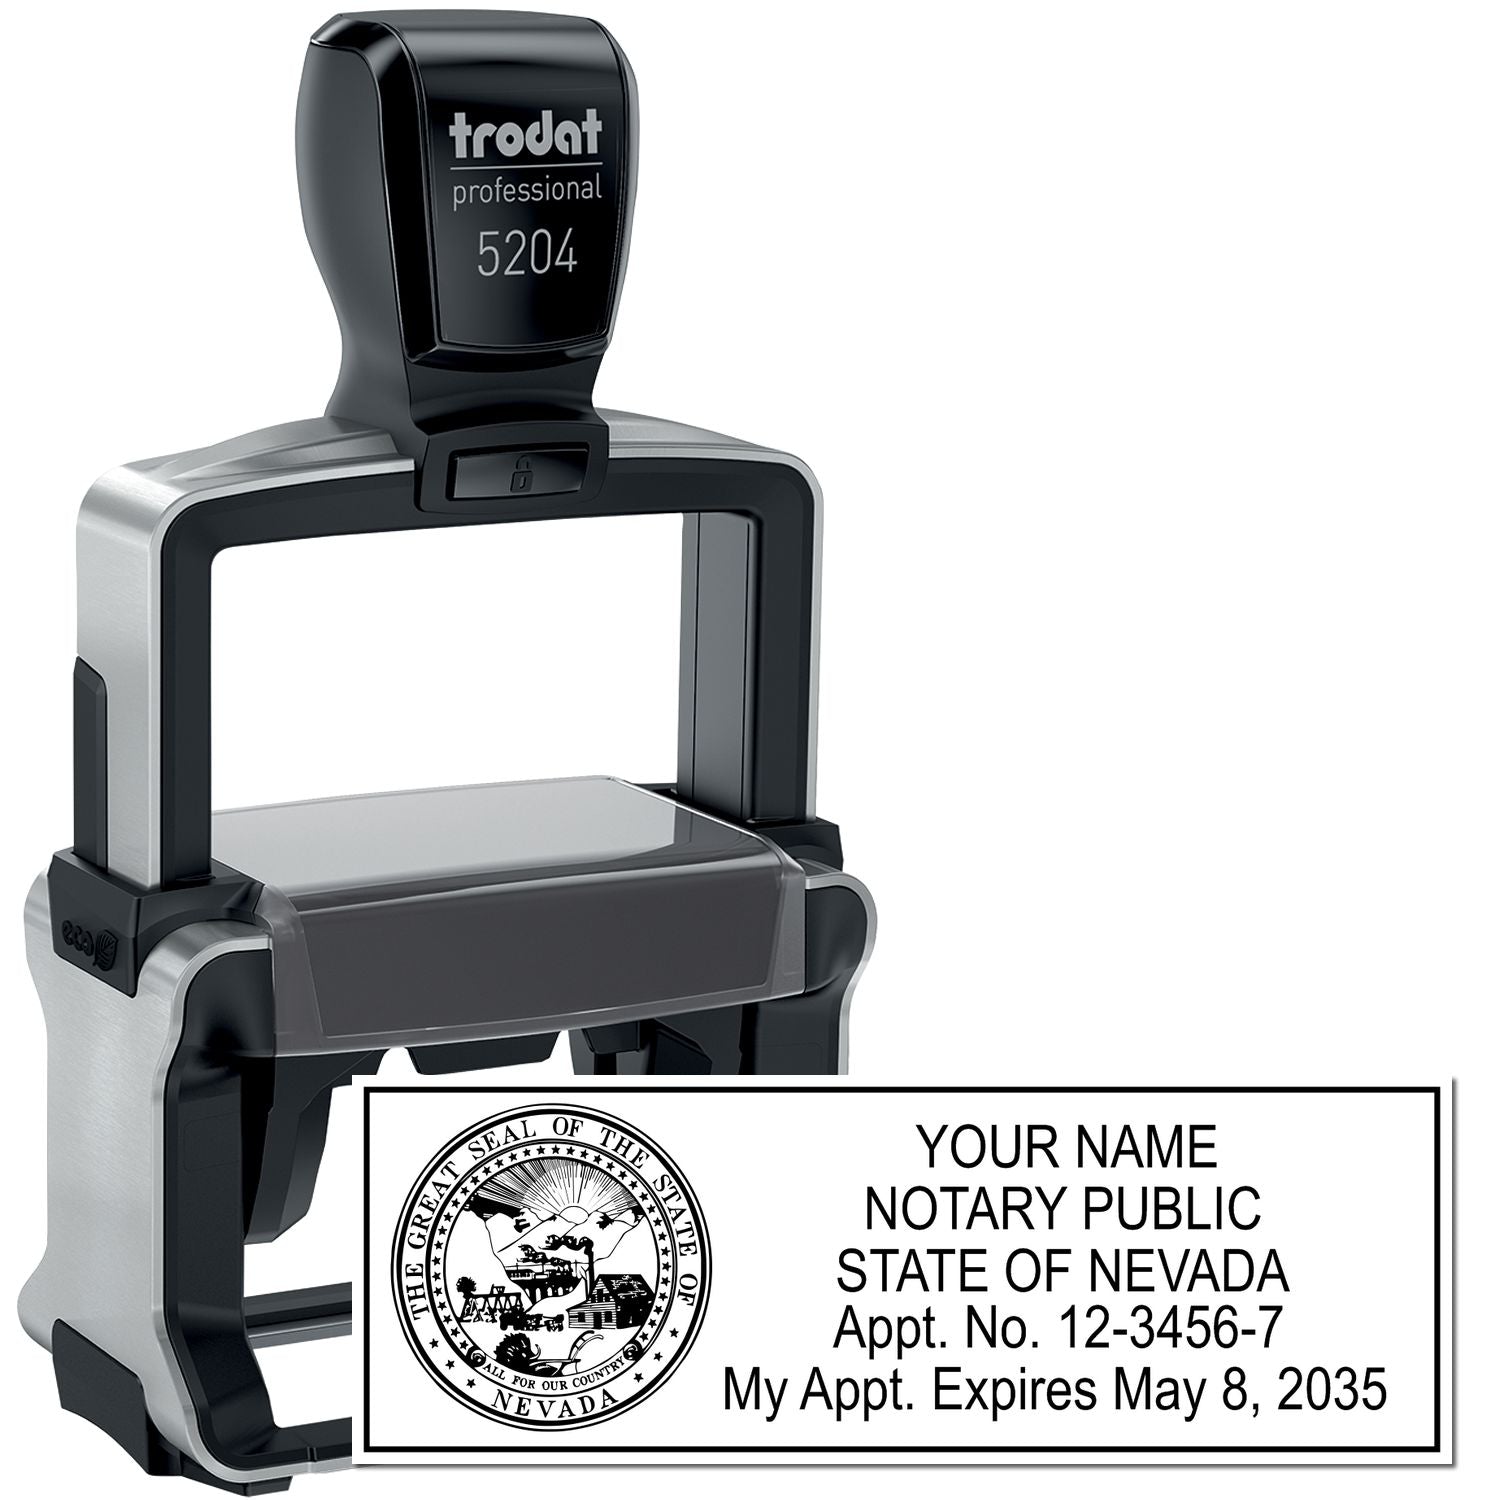 The main image for the Heavy-Duty Nevada Rectangular Notary Stamp depicting a sample of the imprint and electronic files